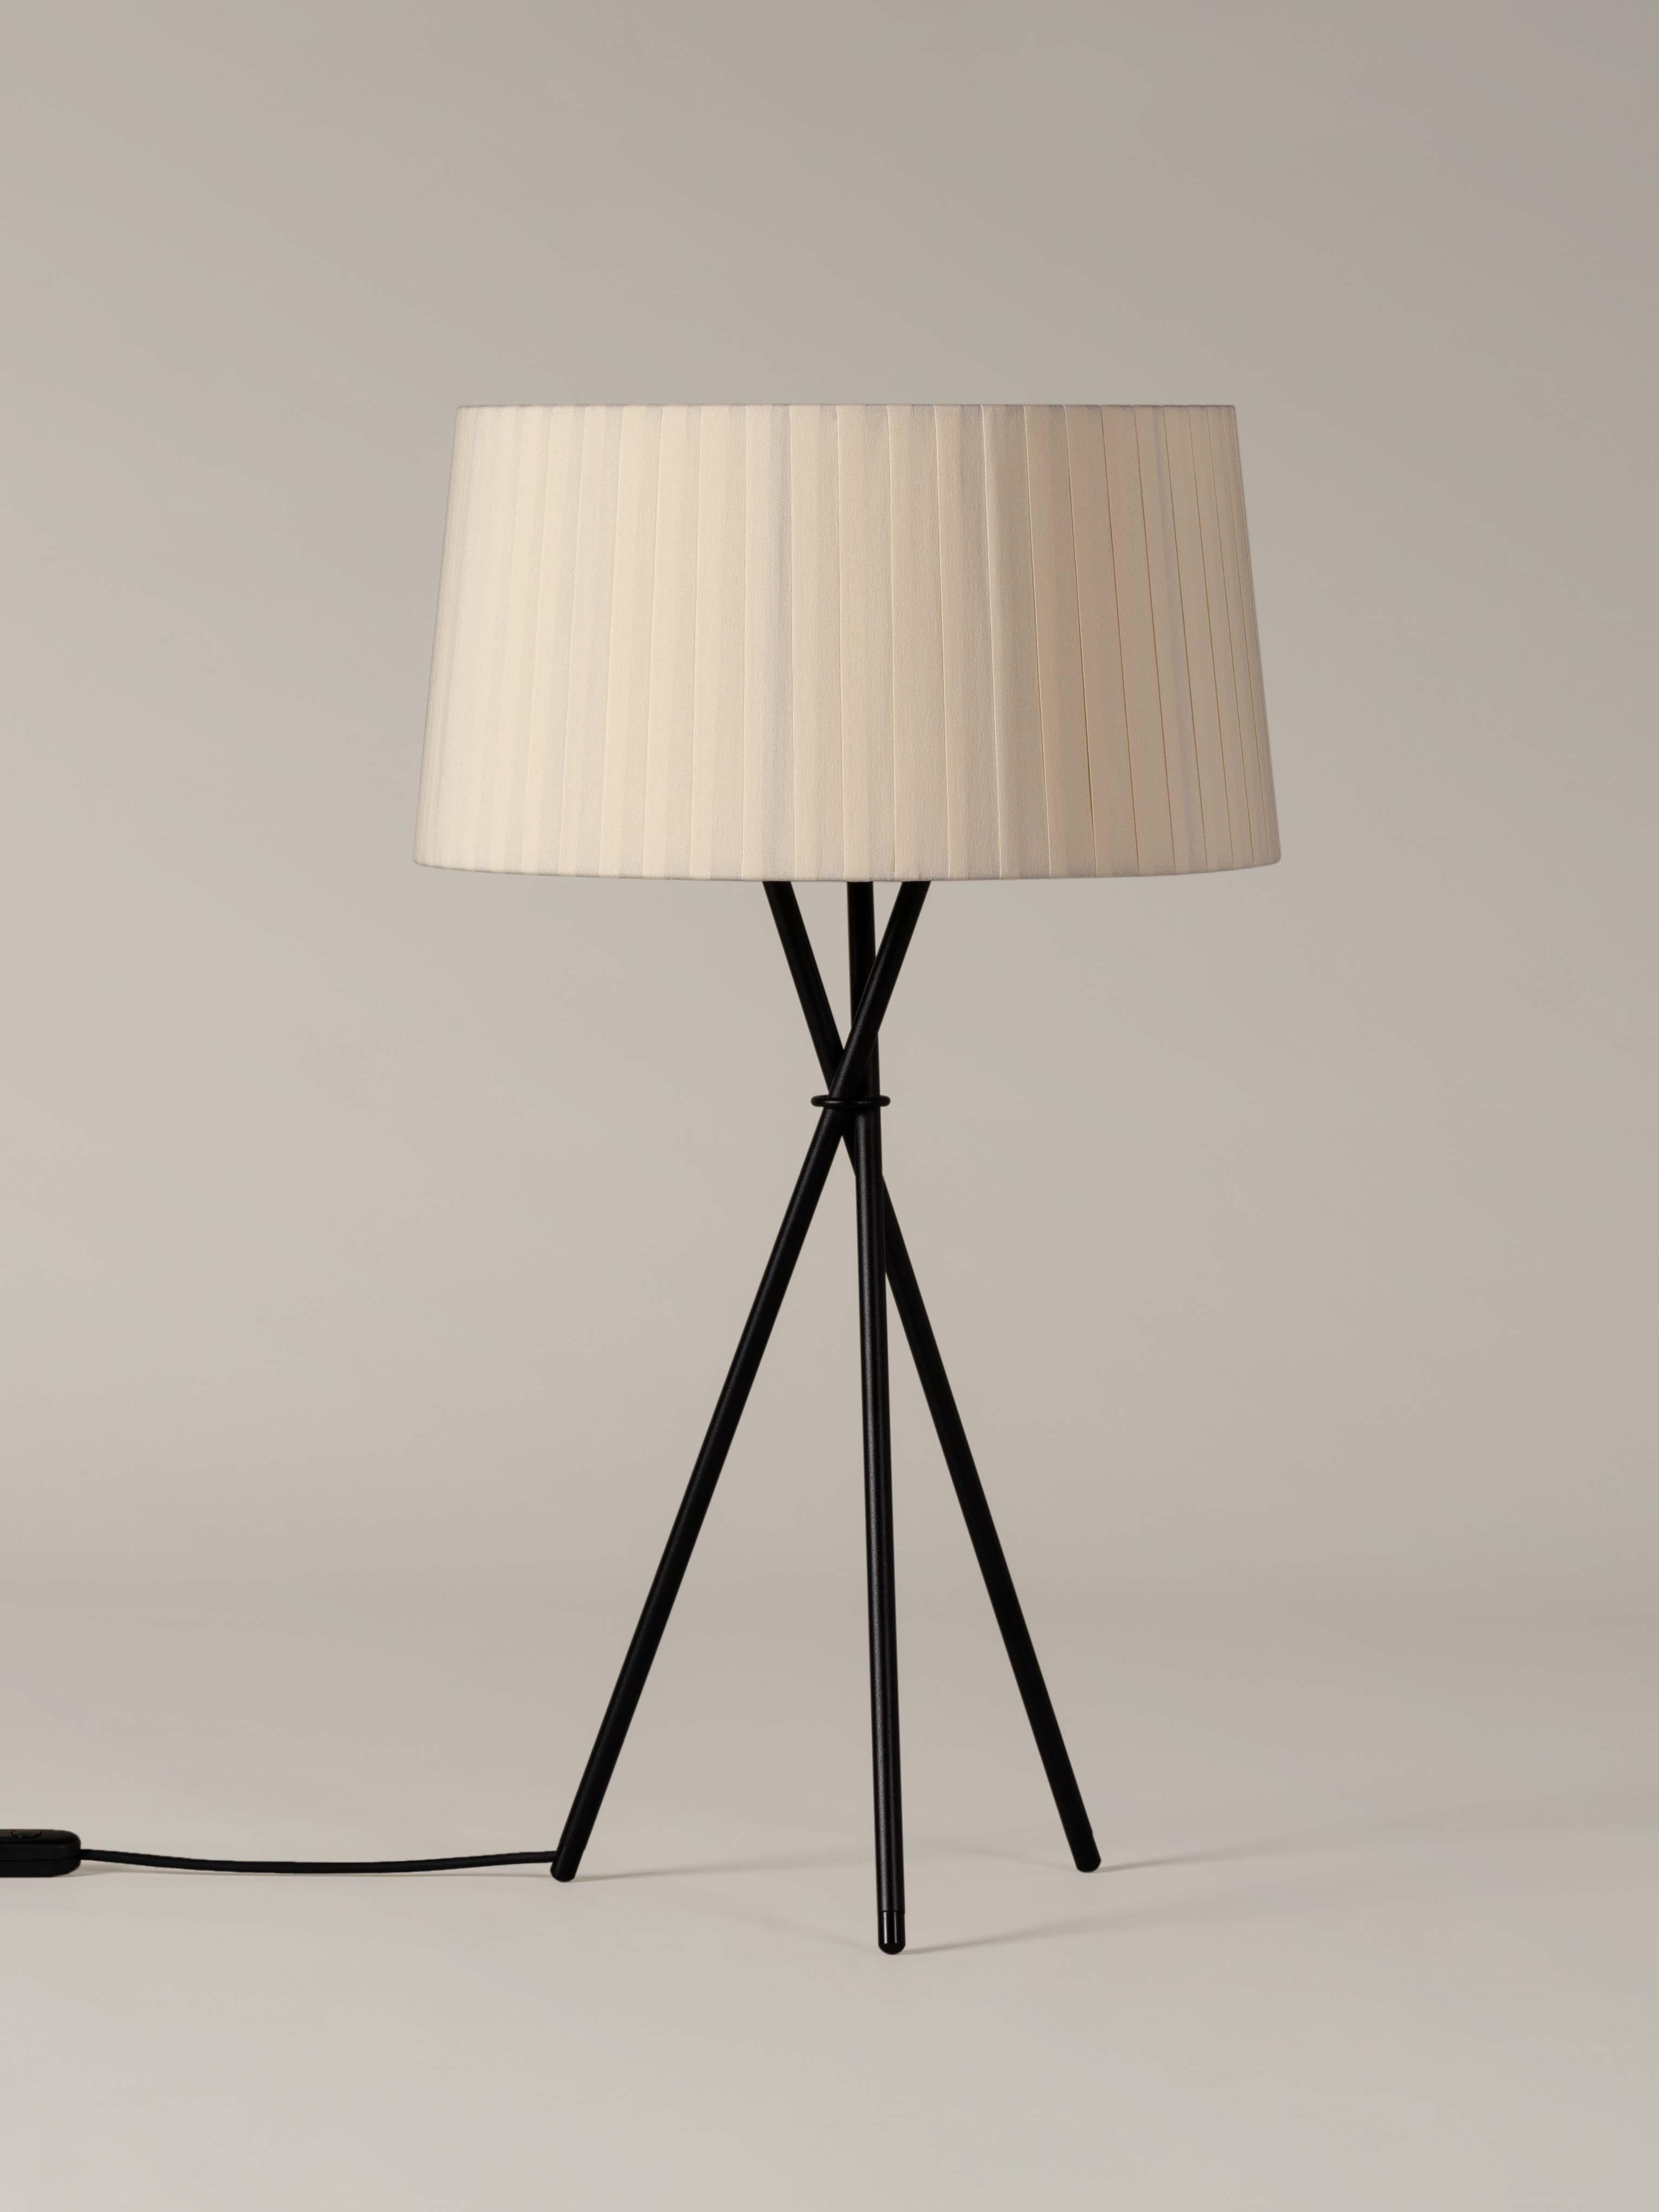 Natural Trípode G6 table lamp by Santa & Cole
Dimensions: D 45 x H 75 cm
Materials: Metal, ribbon.
Available in other colors.

Trípode humanises neutral spaces with its colourful and functional sobriety. The shade is hand ribboned and its base